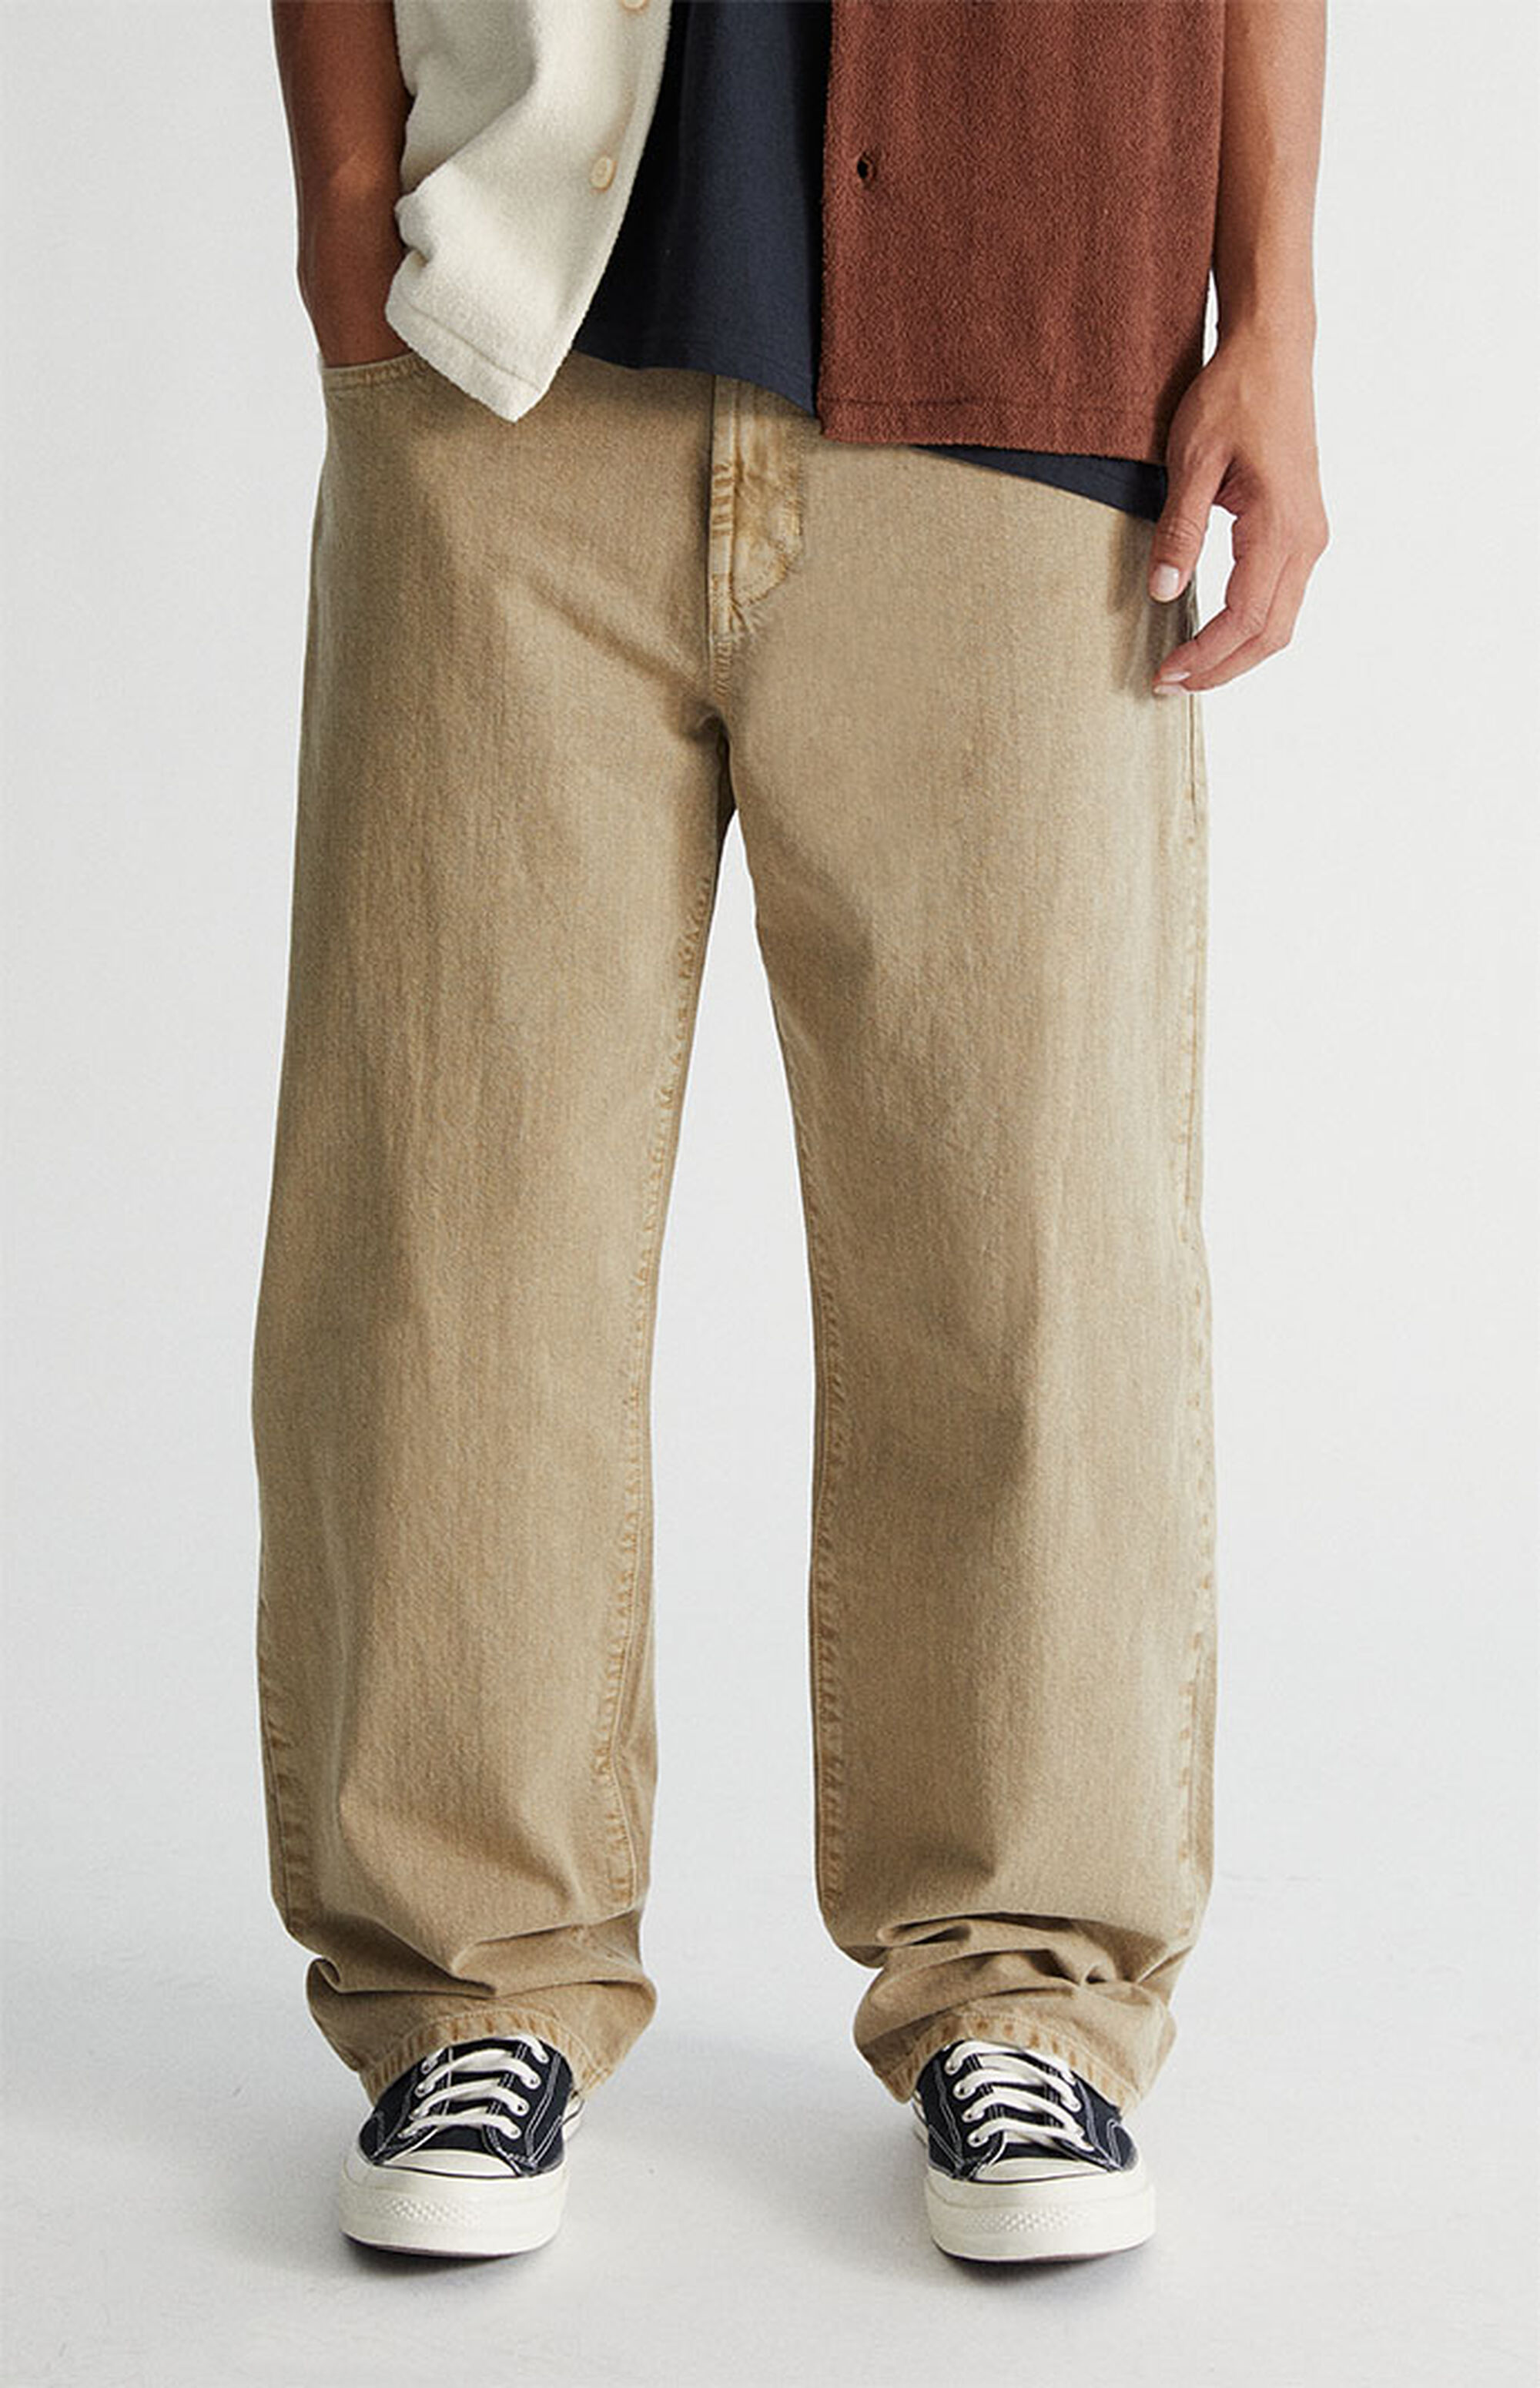 PacSun Recycled Tan Baggy Jeans | PacSun